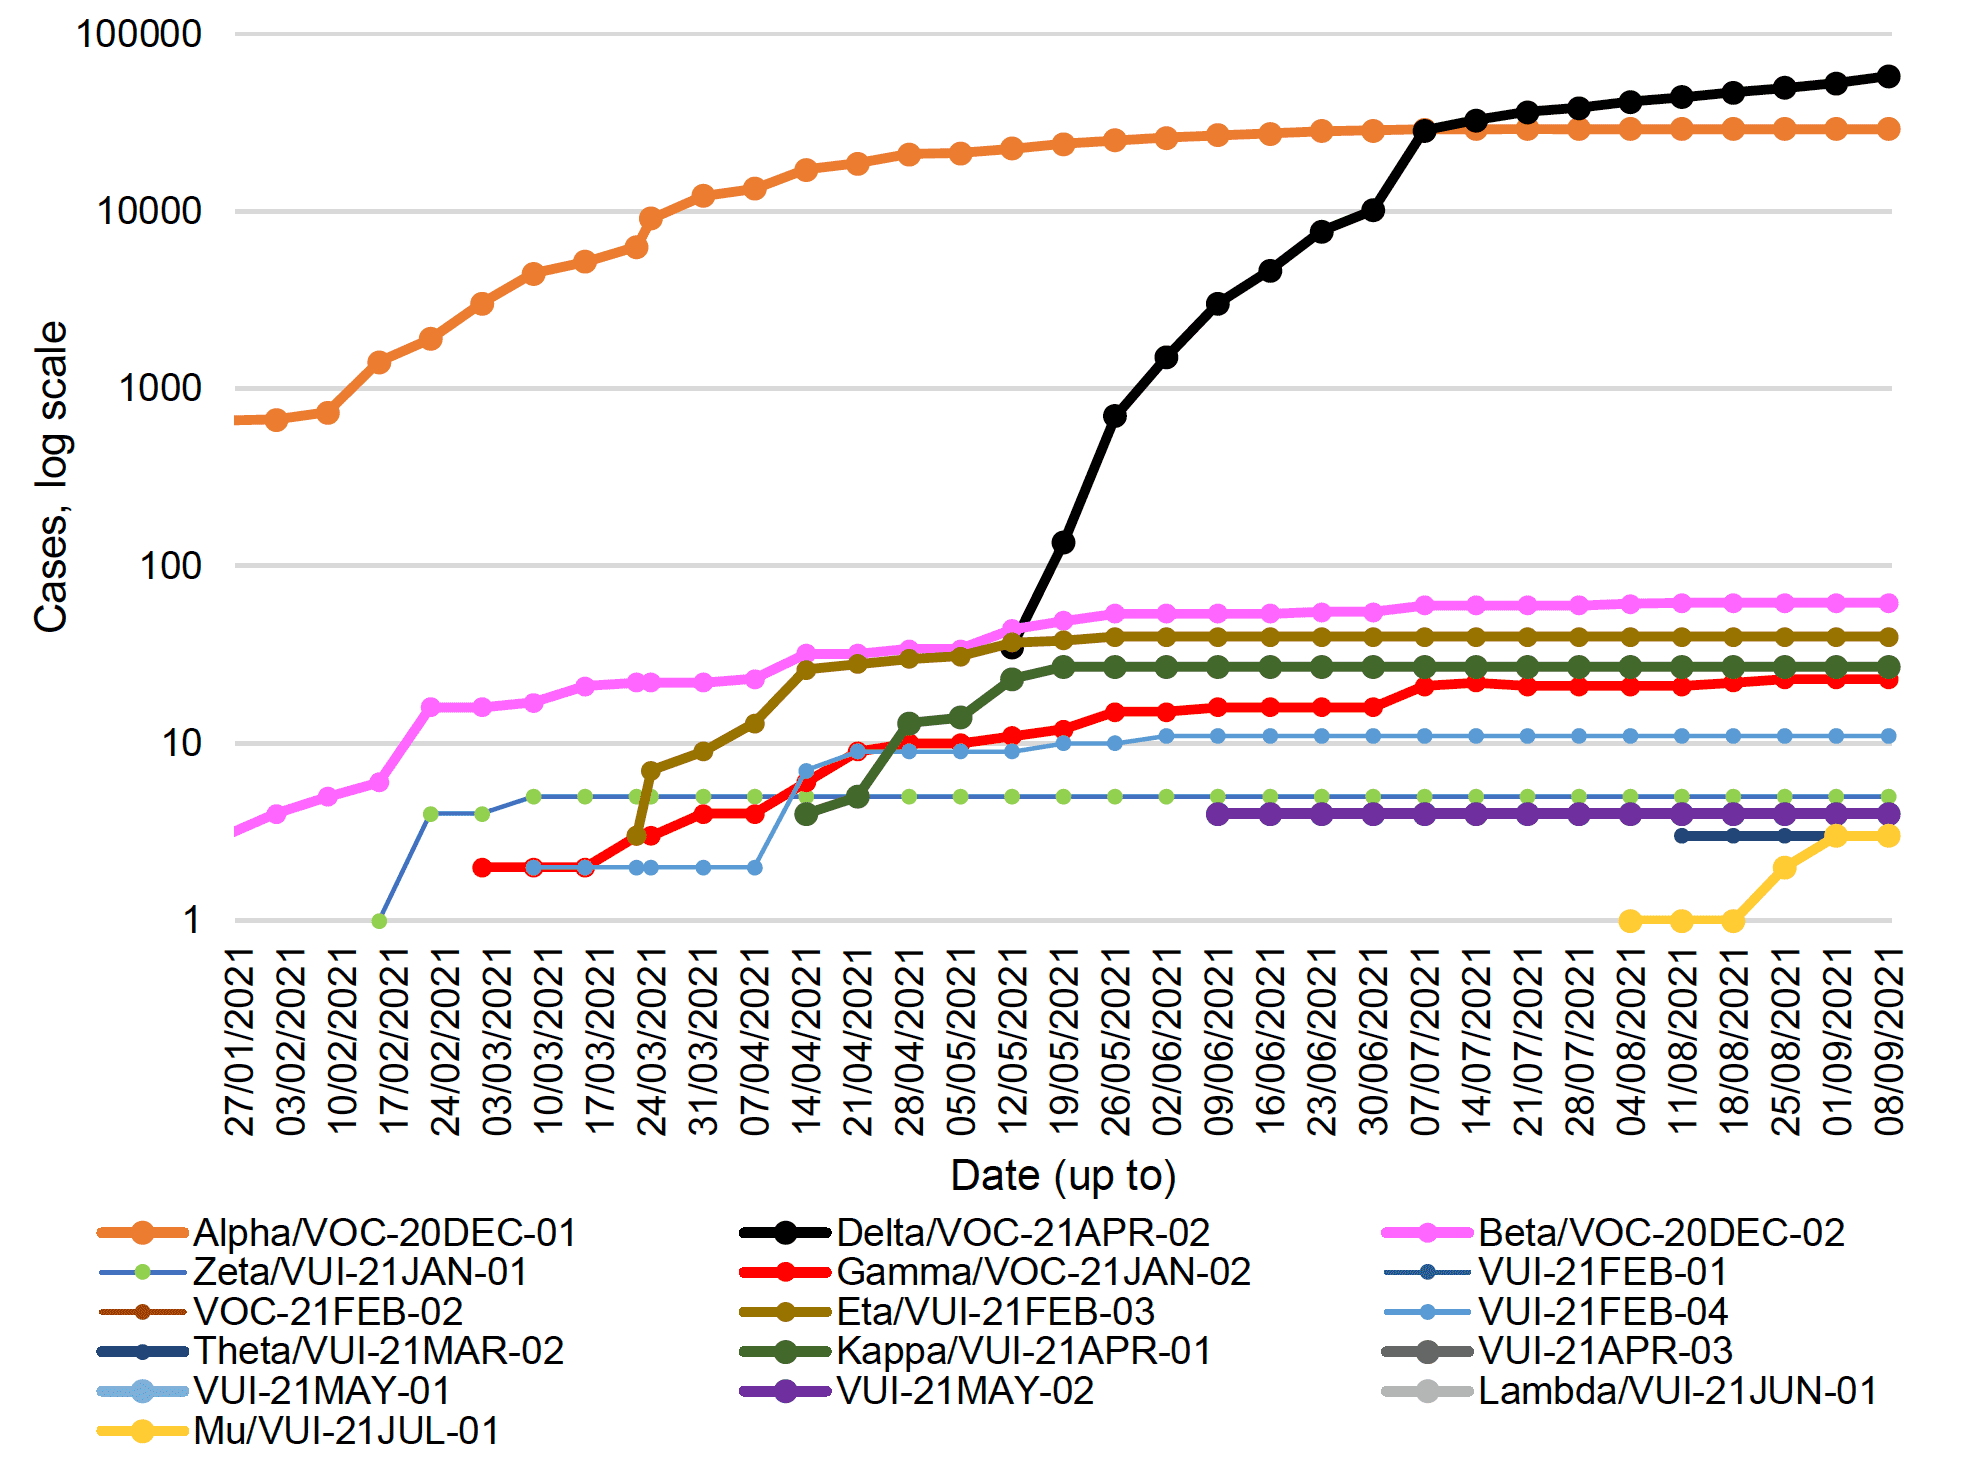 This line graph shows the number of cases of the variants of concern and variants of interest that have been detected by sequencing in Scotland each week, from 25 January to 8 September 2021.

Beta, also known as VOC-20DEC-02, first detected in South Africa, was increasing steadily since late January from 3 cases to 60 cases on the 7 July, and then increased to 62 cases by 11 August. Beta has remained at 62 cases since then. Eta, or VUI-21FEB-03, first identified in Nigeria, rapidly increased since mid-March and reached 40 cases at the end of May. Eta has remained stable over the last 15 weeks. Gamma increased to 23 cases in the week to 25 August but has not increased any further over the last weeks. There are also 27 cases of Kappa, or VUI-21APR-01, first identified in India, no change since mid-May. The first case of VUI-21Jul-01 emerged in the week to 4 August with three new case identified in the week to 1 September, however no change over the last week. Delta, also known as VOC-21APR-02, first identified in India, has seen a rapid increase in the past 17 weeks to 58,022 cases, an increase of 4,979 cases since the week before.
